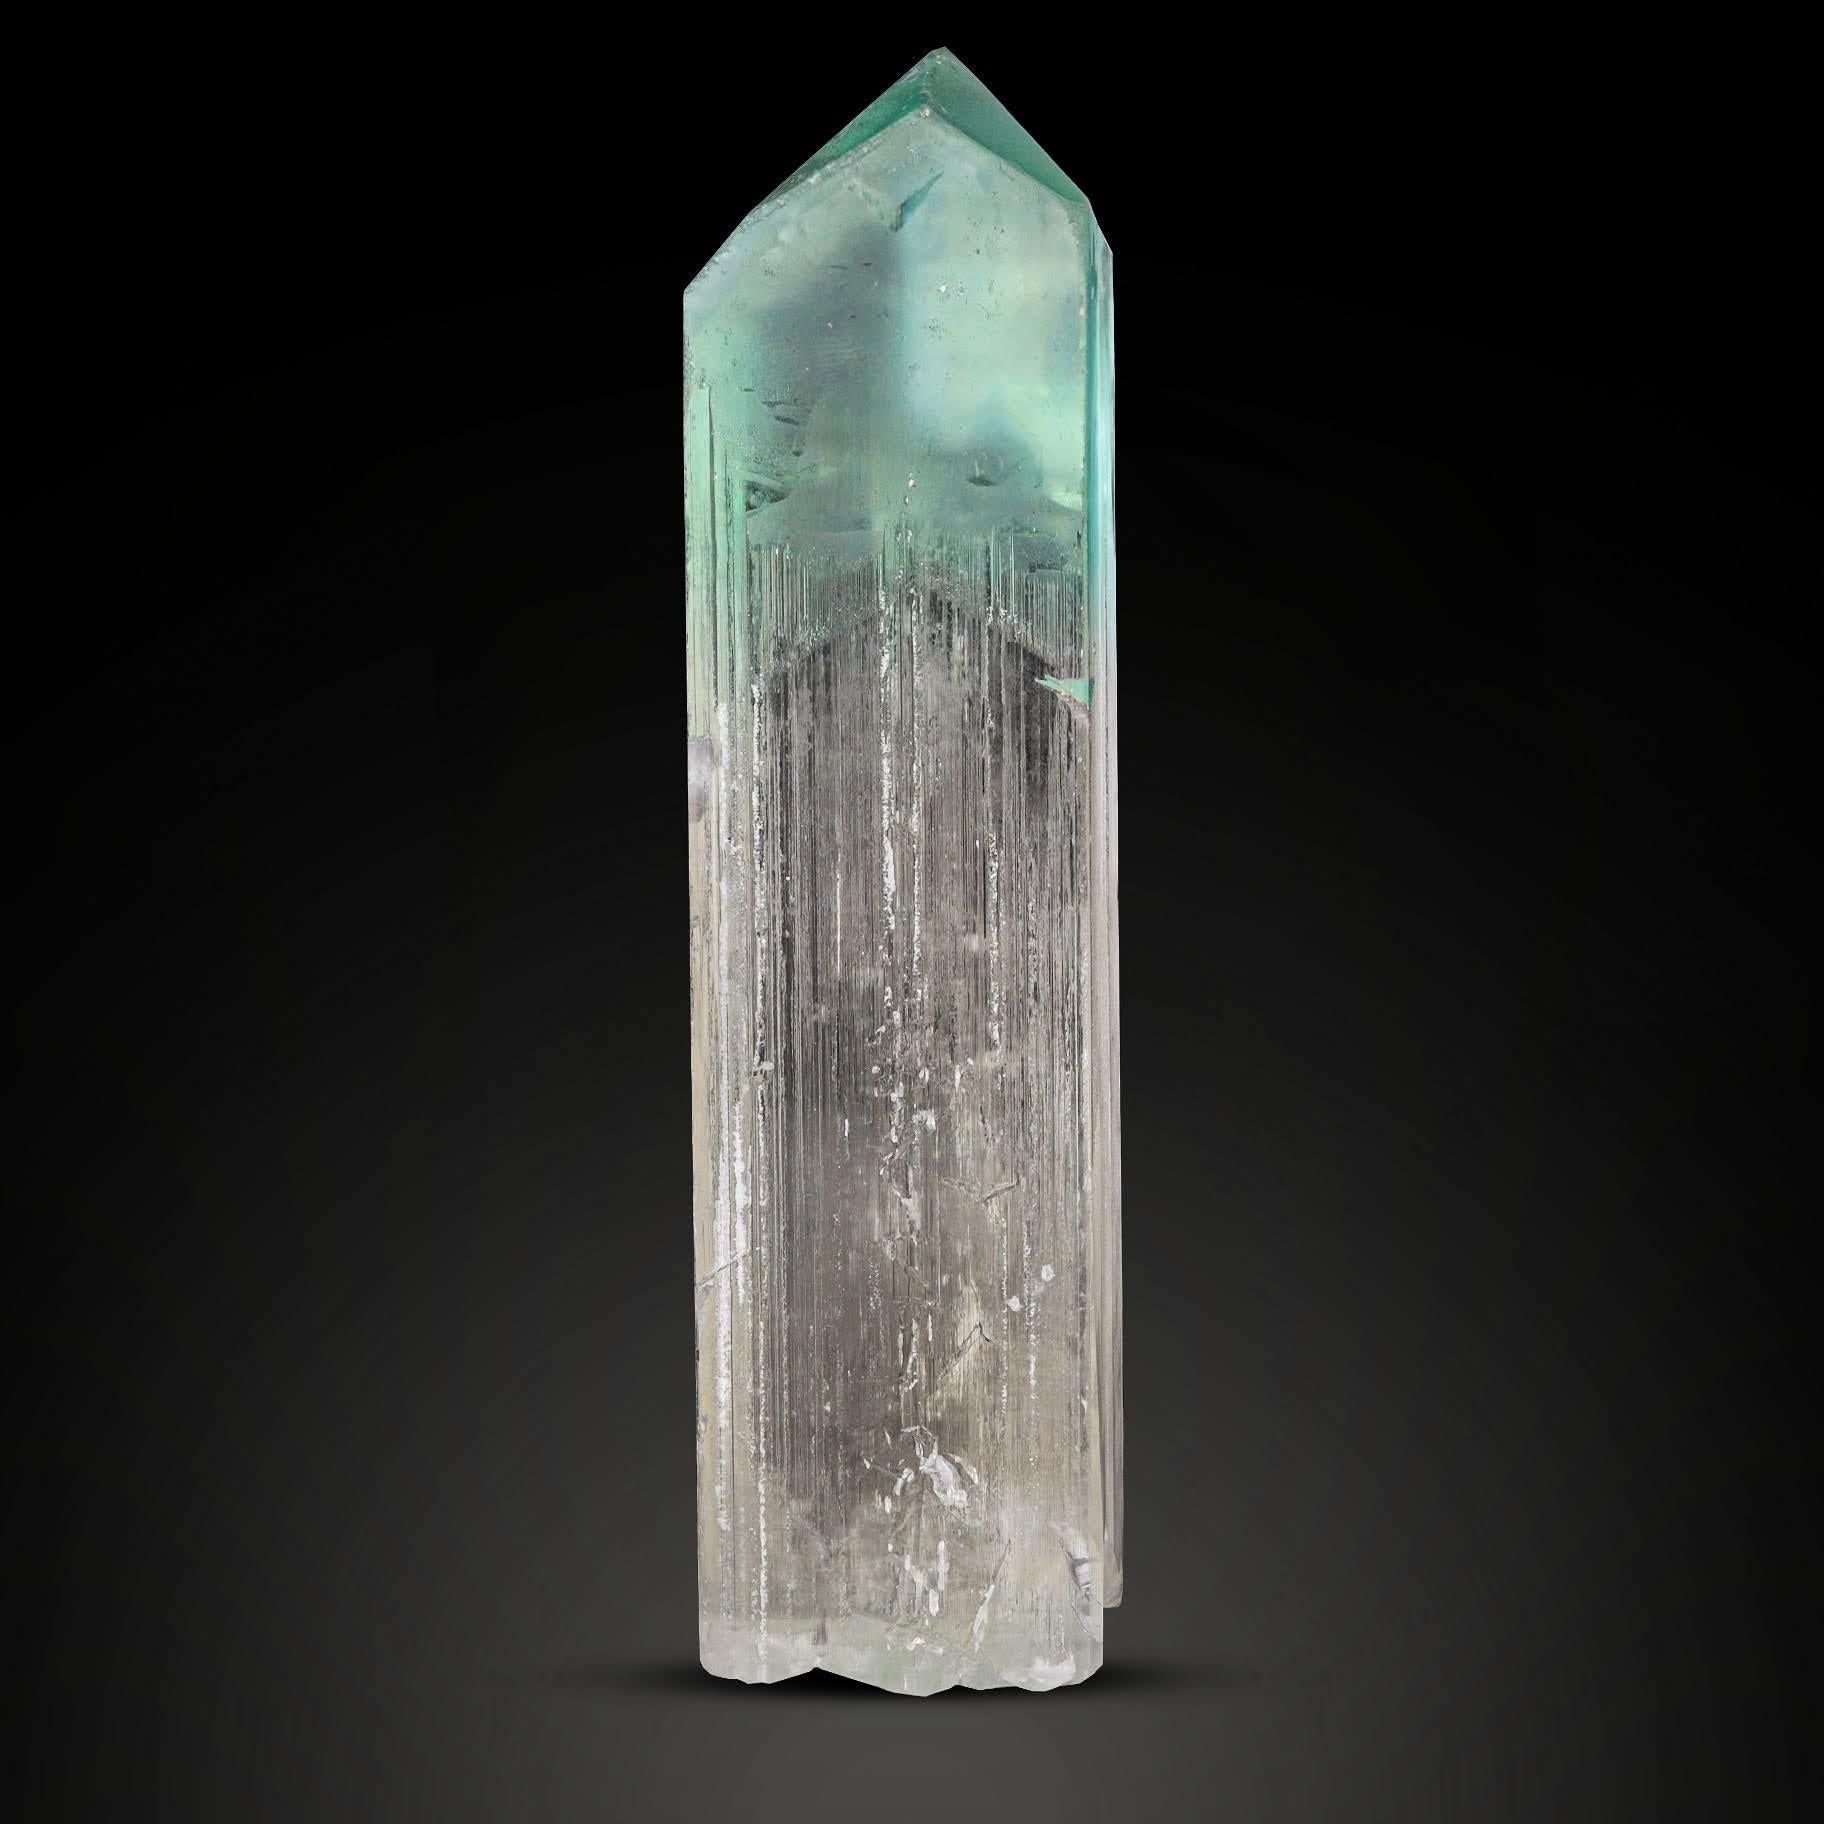 Dim: H: 17 x W: 4 x D: 2.8 cm 

Wt: 503 g

Specimen Type: Bi color Hiddenite Kunzite crystal 

Treatment: None 

Color: Green 




Hiddenite Kunzite crystals from Afghanistan are renowned for their stunning beauty and metaphysical properties. This